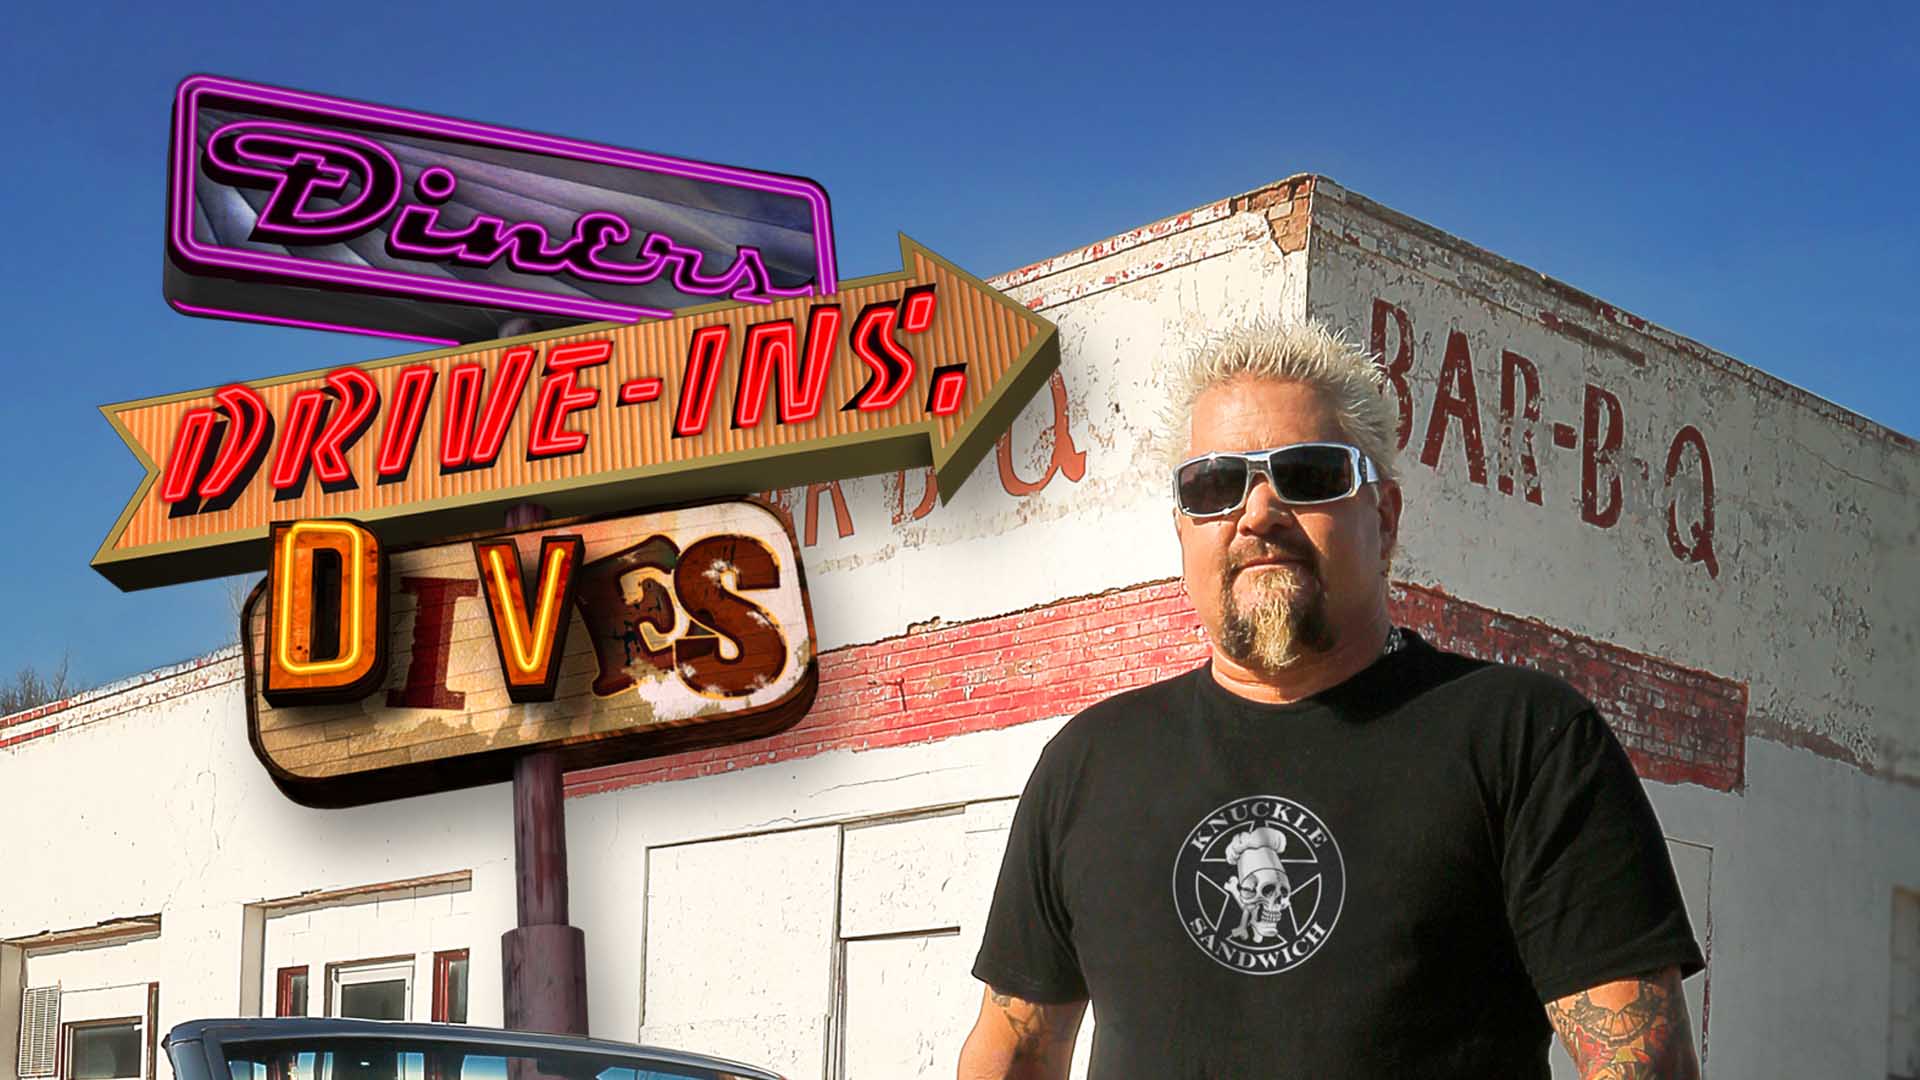 Diners, Drive-Ins, and Dives - Happy #CyberMonday! Save up to 50